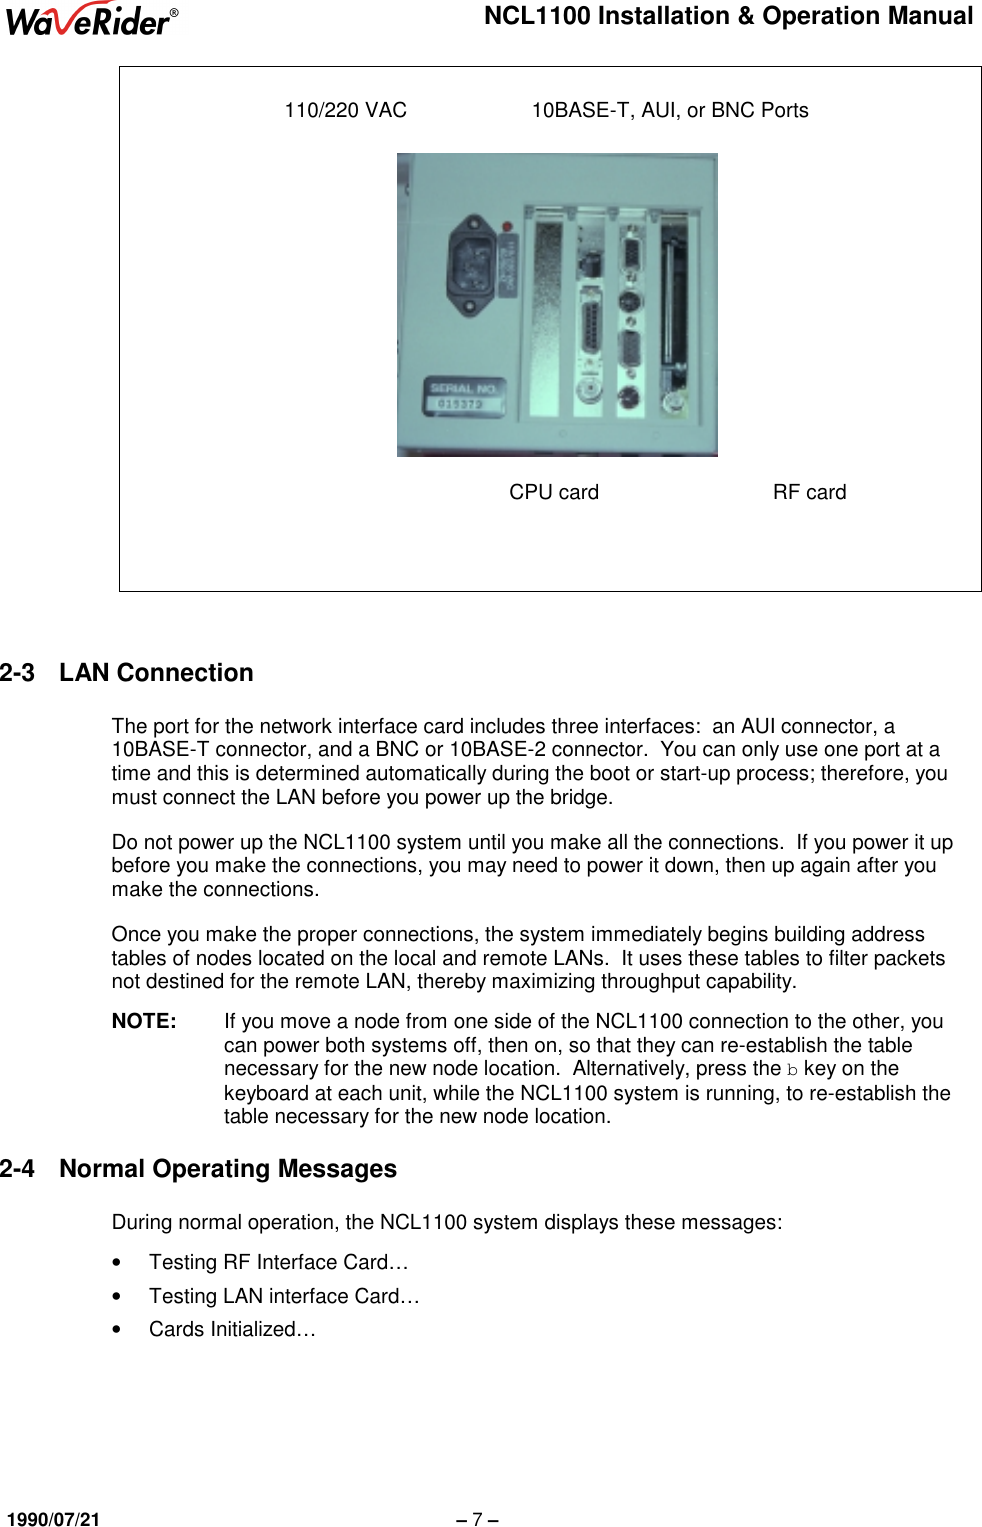 NCL1100 Installation &amp; Operation Manual1990/07/21 – 7 –2-3 LAN ConnectionThe port for the network interface card includes three interfaces:  an AUI connector, a10BASE-T connector, and a BNC or 10BASE-2 connector.  You can only use one port at atime and this is determined automatically during the boot or start-up process; therefore, youmust connect the LAN before you power up the bridge.Do not power up the NCL1100 system until you make all the connections.  If you power it upbefore you make the connections, you may need to power it down, then up again after youmake the connections.Once you make the proper connections, the system immediately begins building addresstables of nodes located on the local and remote LANs.  It uses these tables to filter packetsnot destined for the remote LAN, thereby maximizing throughput capability.NOTE: If you move a node from one side of the NCL1100 connection to the other, youcan power both systems off, then on, so that they can re-establish the tablenecessary for the new node location.  Alternatively, press the b key on thekeyboard at each unit, while the NCL1100 system is running, to re-establish thetable necessary for the new node location.2-4  Normal Operating MessagesDuring normal operation, the NCL1100 system displays these messages:•  Testing RF Interface Card…•  Testing LAN interface Card…• Cards Initialized…110/220 VAC 10BASE-T, AUI, or BNC PortsCPU card RF card